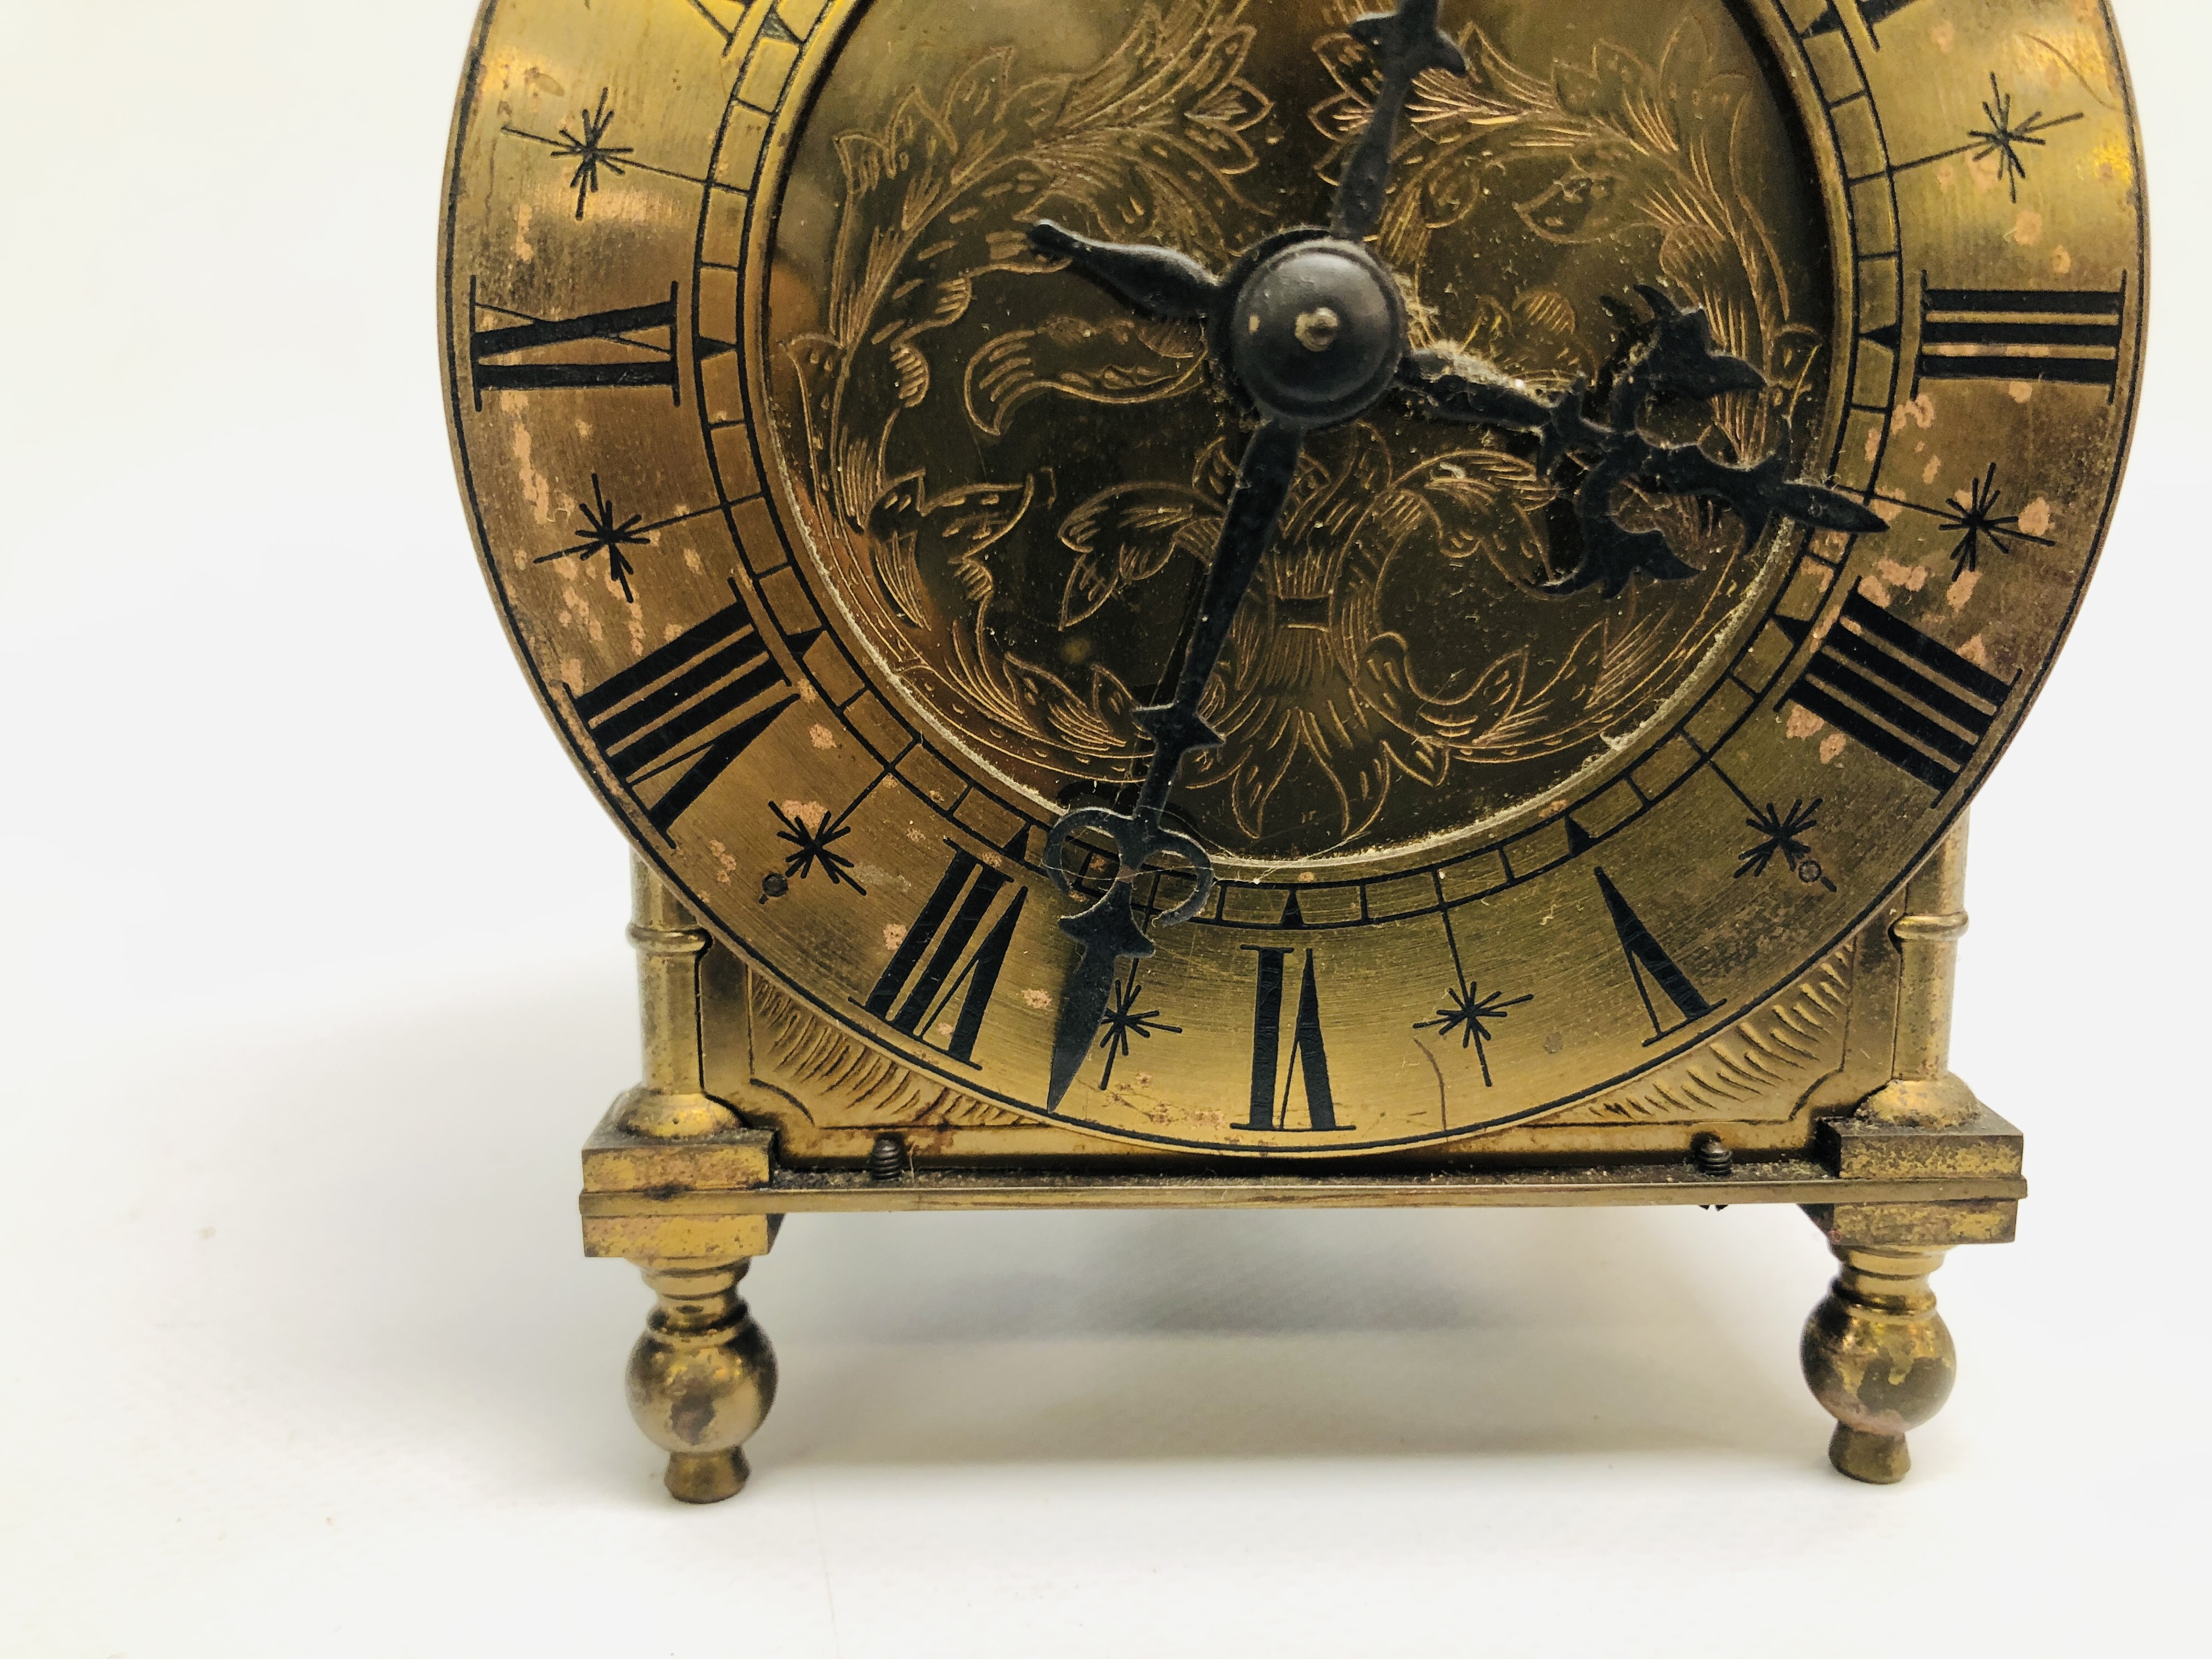 A FRENCH CARRIAGE CLOCK, THE FACE BEING PLASTIC + A MANTEL CLOCK OF LANTERN FORM. - Image 9 of 12